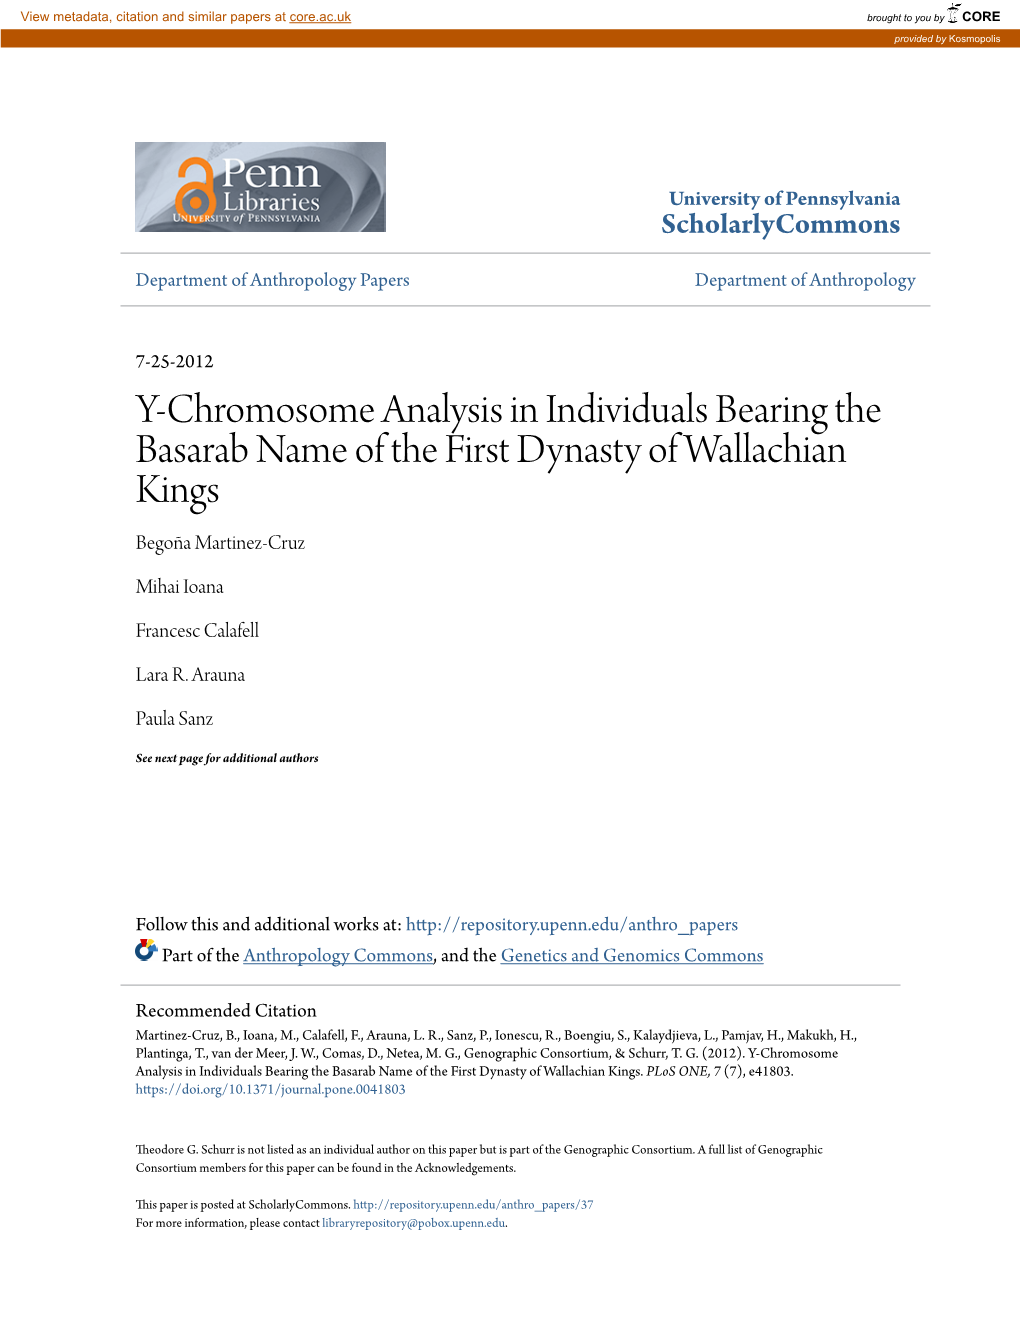 Y-Chromosome Analysis in Individuals Bearing the Basarab Name of the First Dynasty of Wallachian Kings Begoña Martinez-Cruz